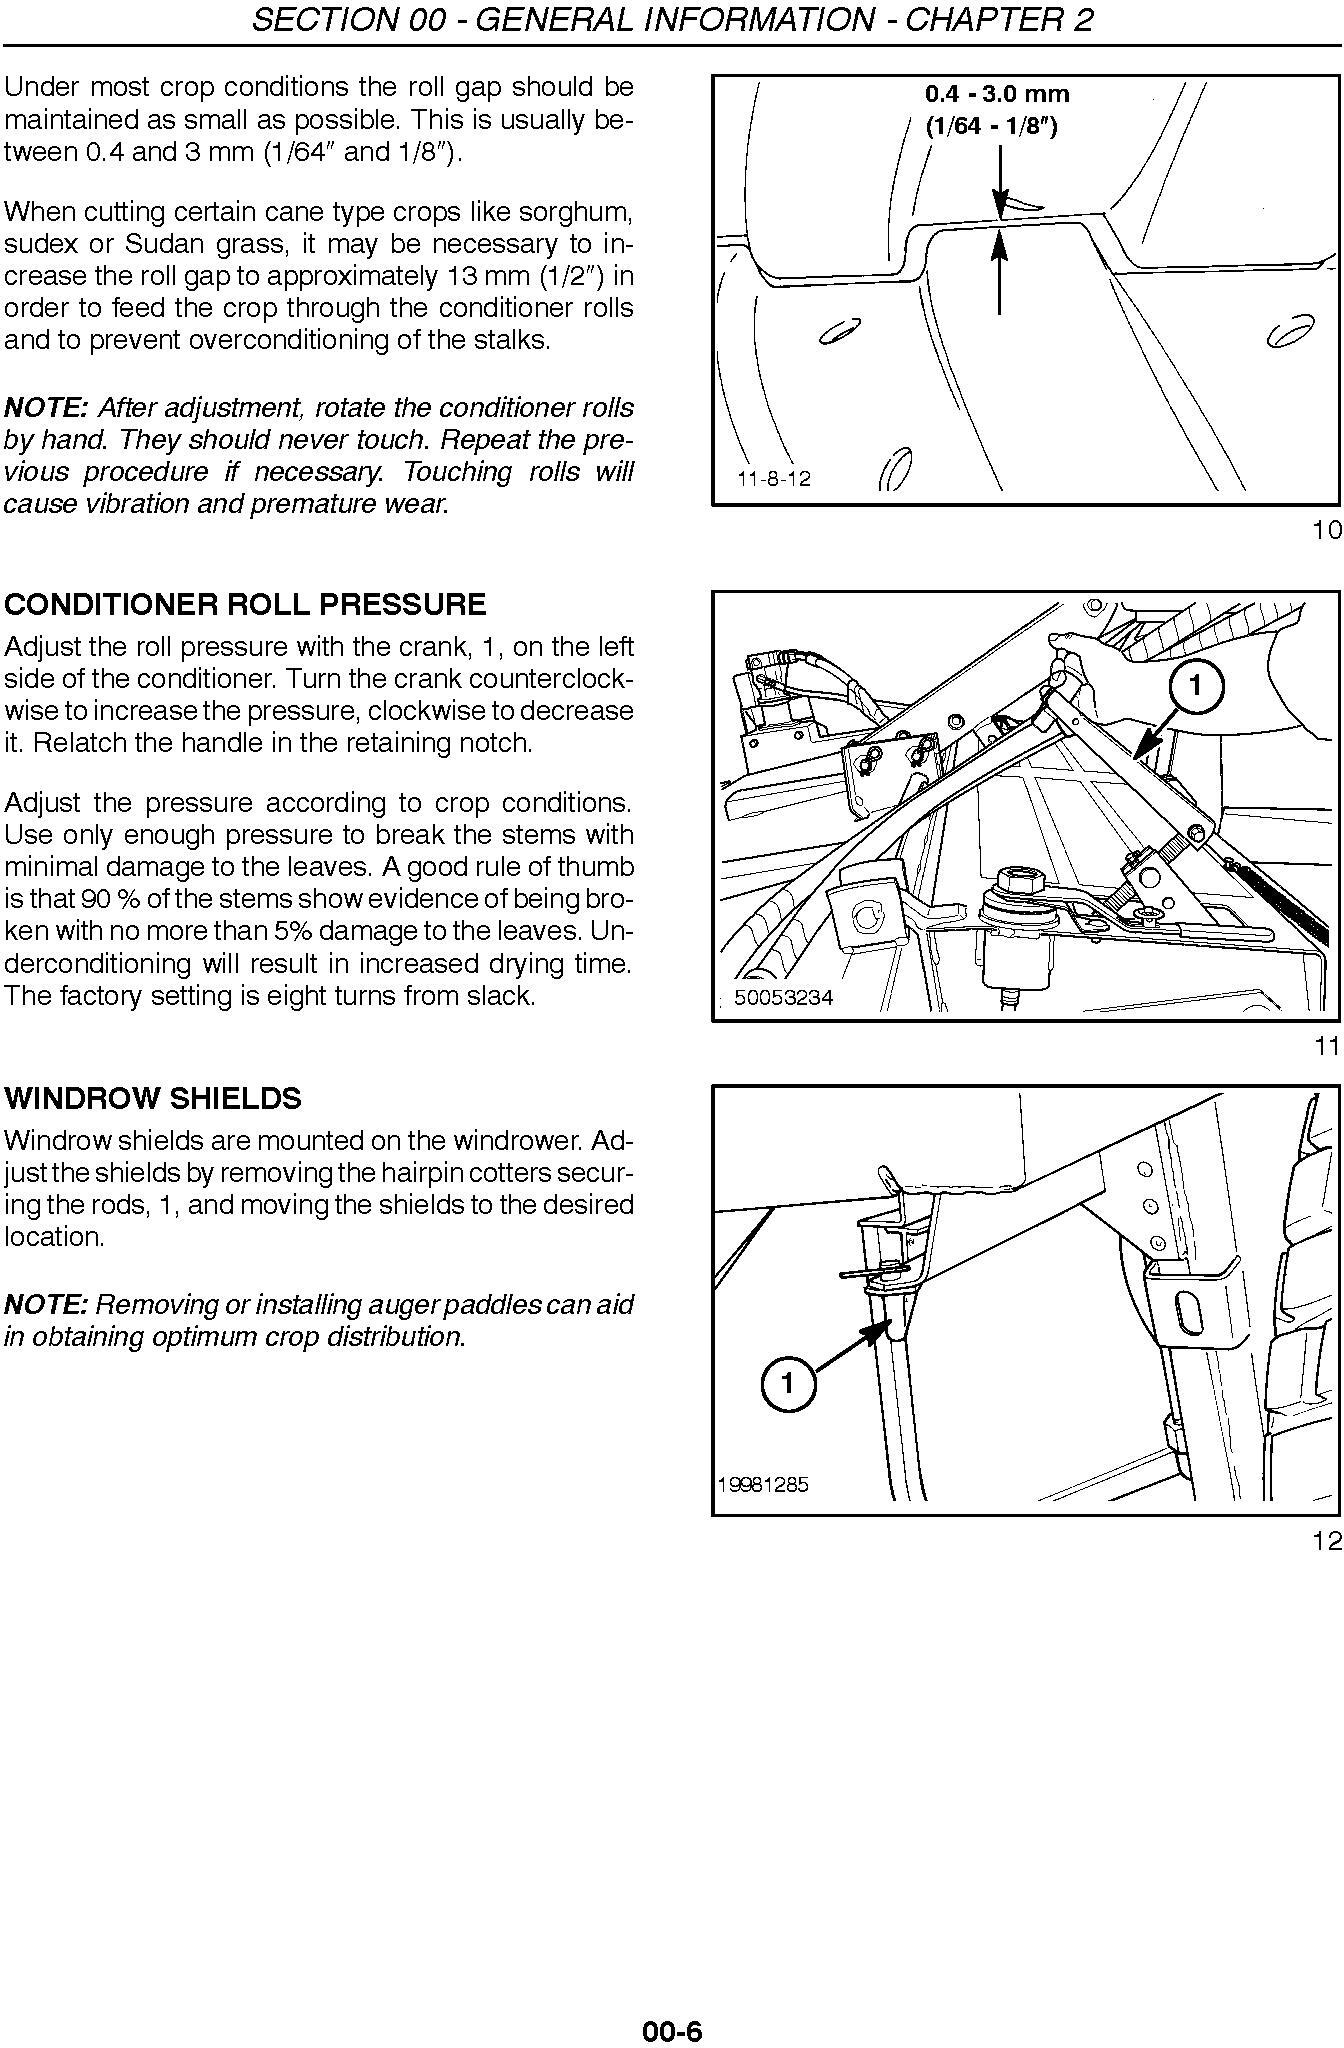 New Holland 2355 and 2358 Disc Auger Header Service Manual - 3